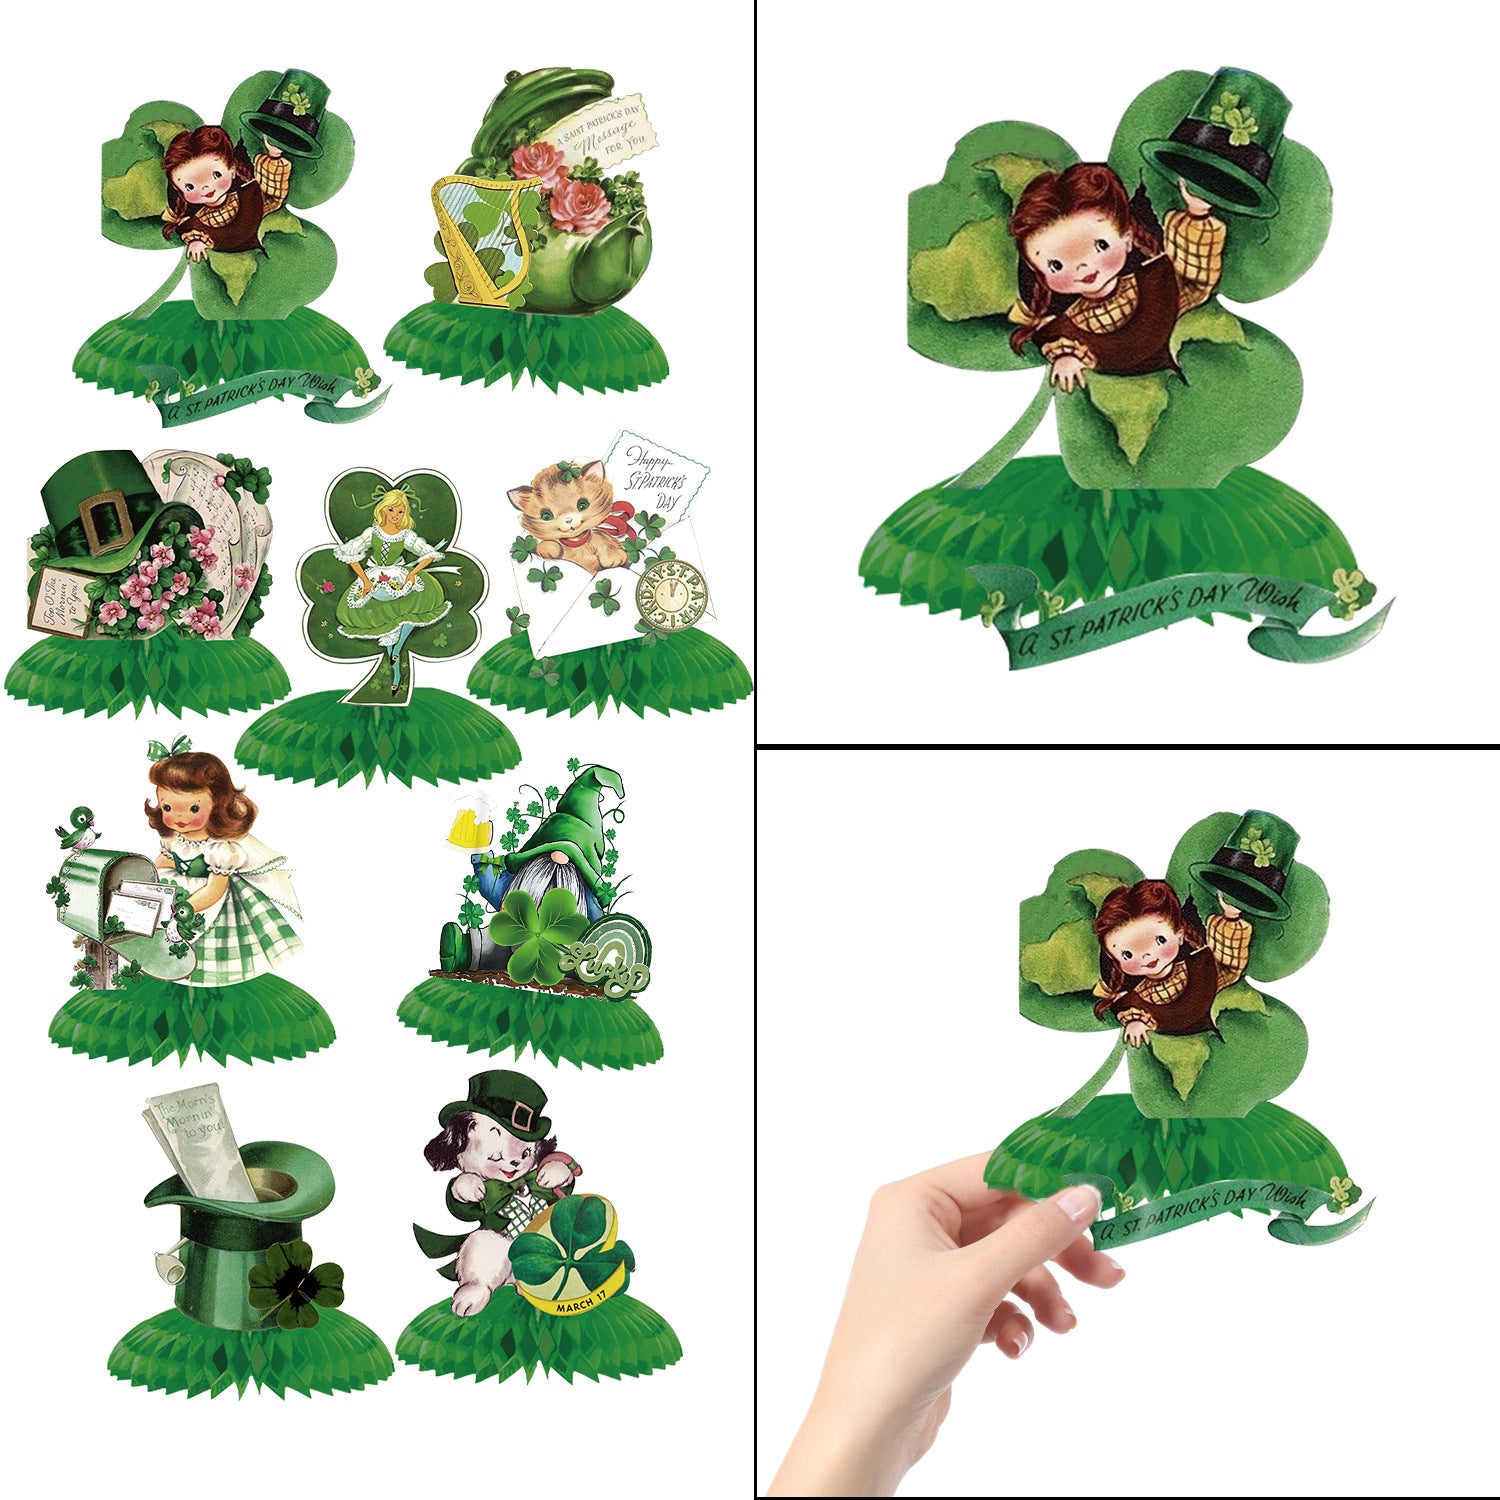 St. Patrick's Day party decorations, St. Patrick's Day Party Photo Props Whimsy Paper